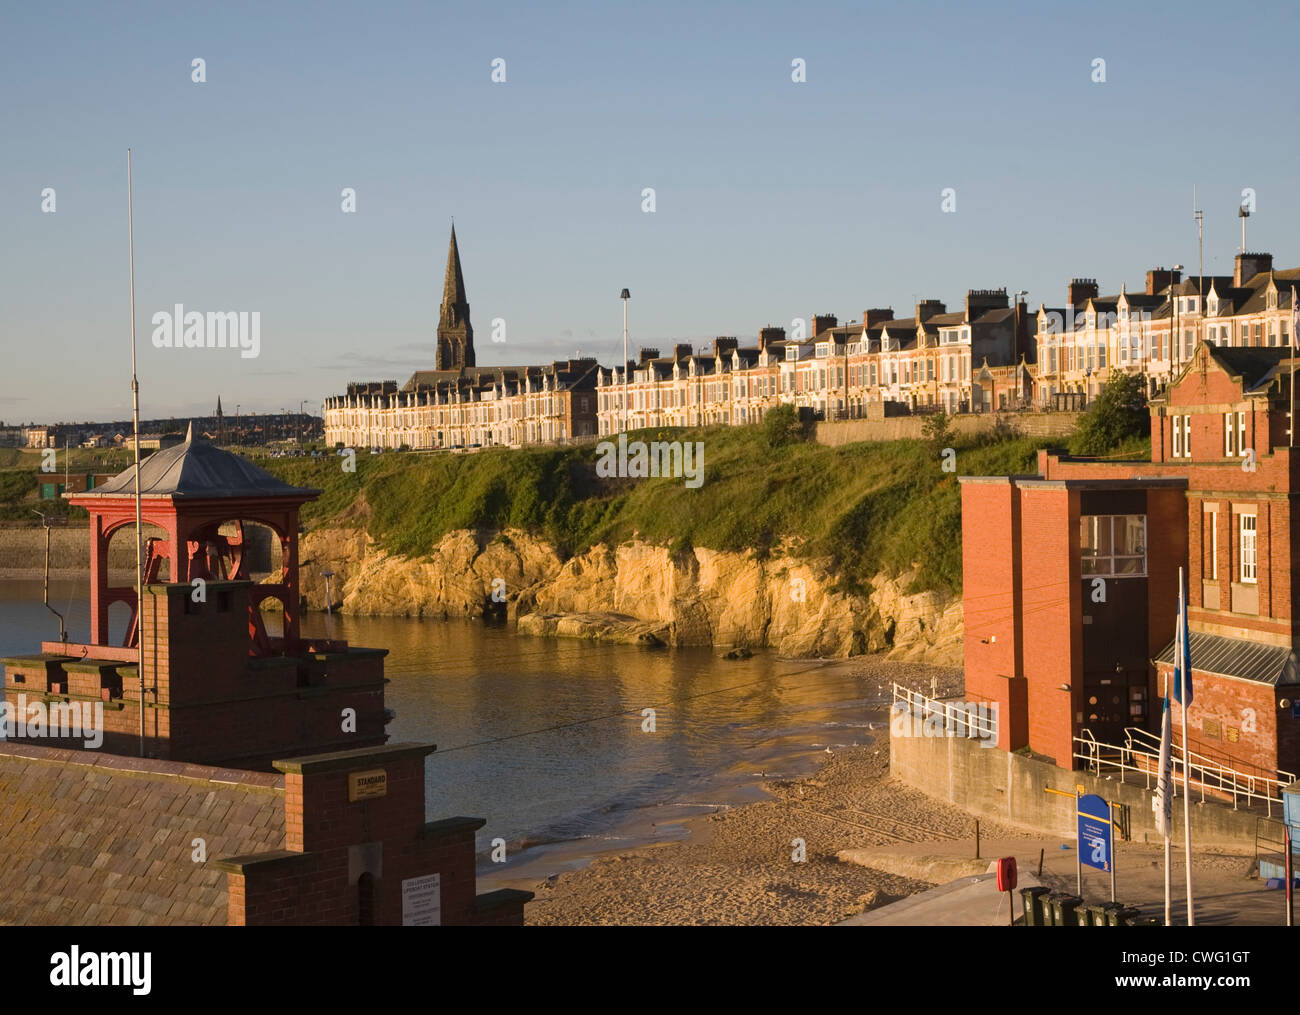 Sea front houses at Cullercoats, Northumberland, England Stock Photo